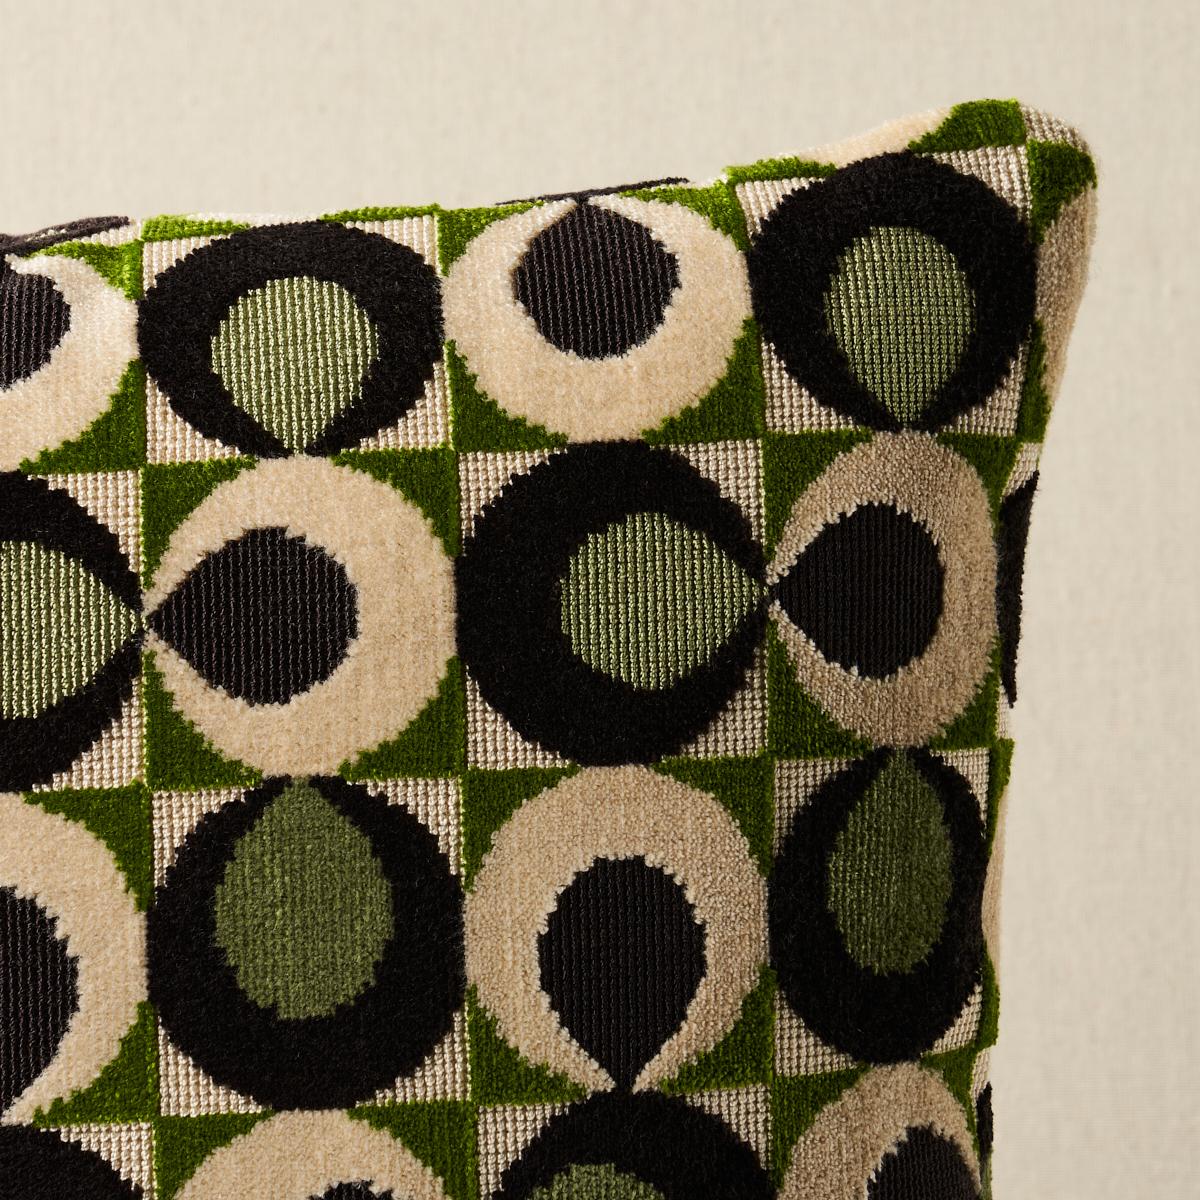 This pillow features Eclipse Velvet with a knife edge finish. Its cut pile and loop construction makes Eclipse Velvet in spruce a fabulous multitextured fabric with a mod multidimensional look. Pillow includes a feather/down fill insert and hidden